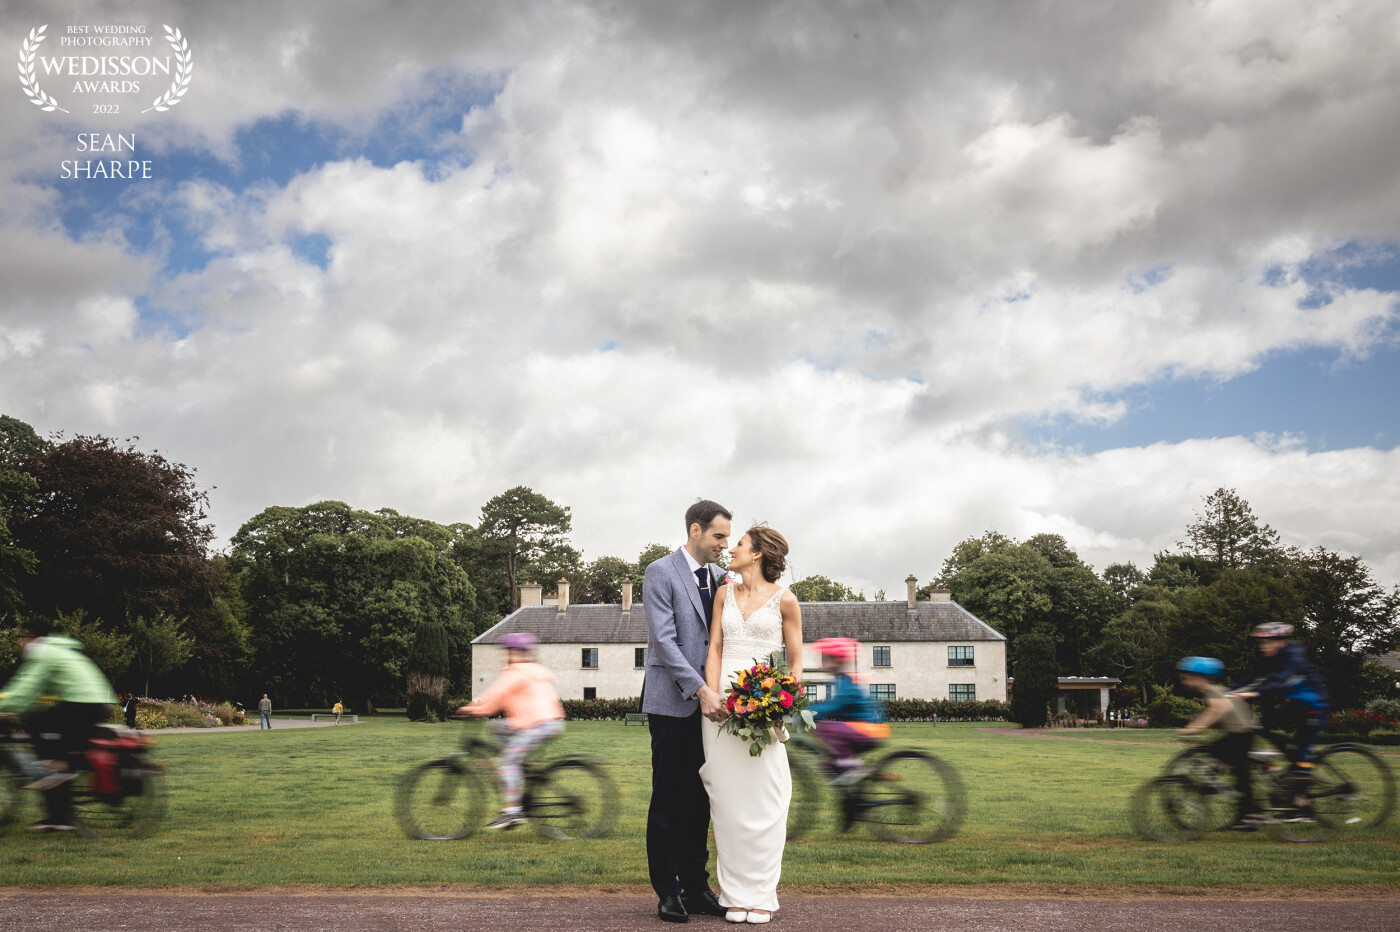 Taken in the grounds of Killarney House and Gardens, Anita and Eoghan were just brilliant to work with on their wedding day. For this shot, I made a random family of cyclists go passed repeatedly until we got it right for that motion blur effect.